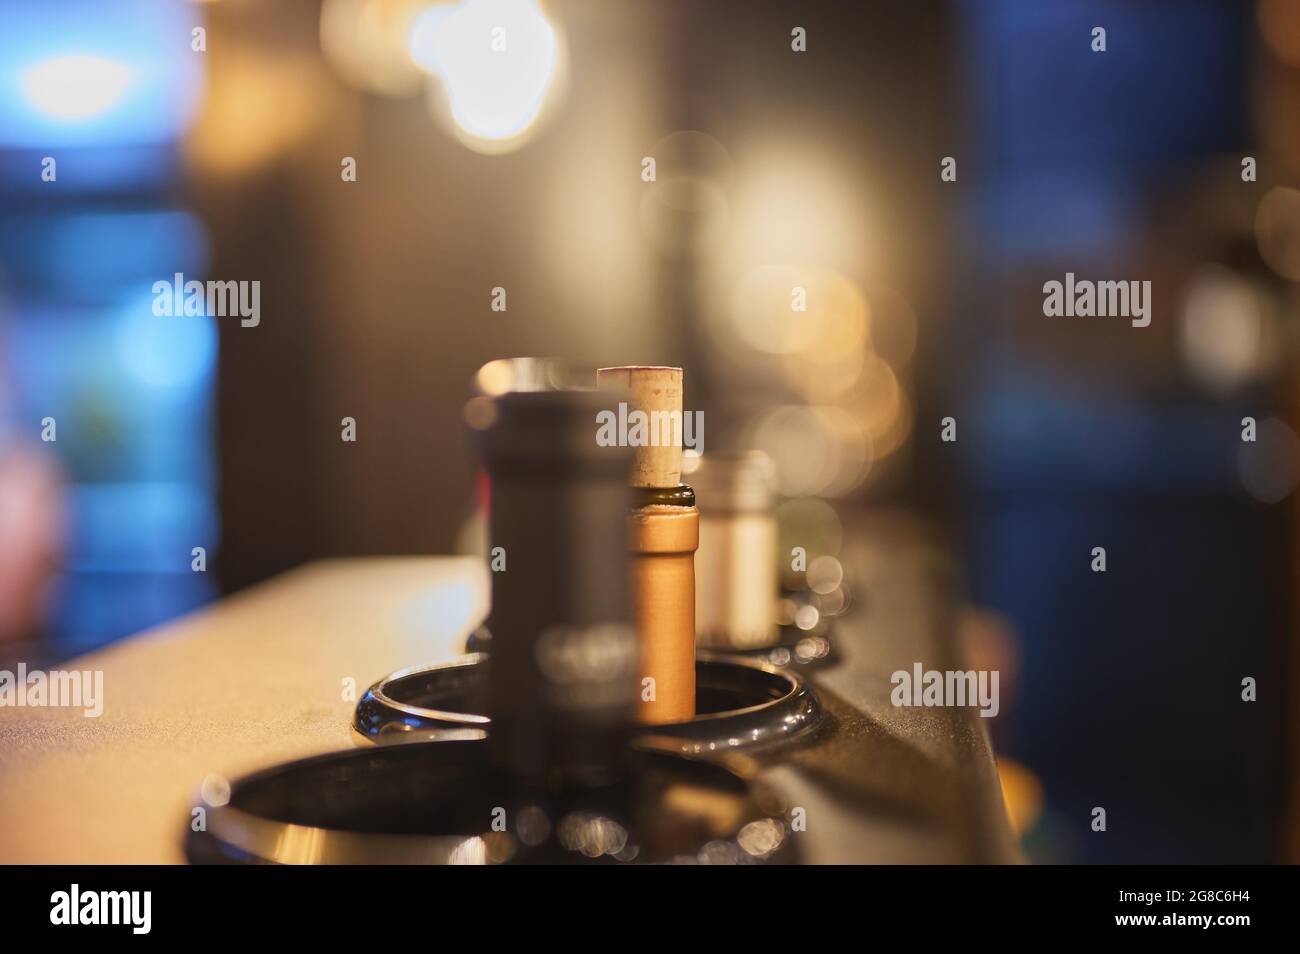 detail of wine bottles placed in a cooler at a restaurant Stock Photo